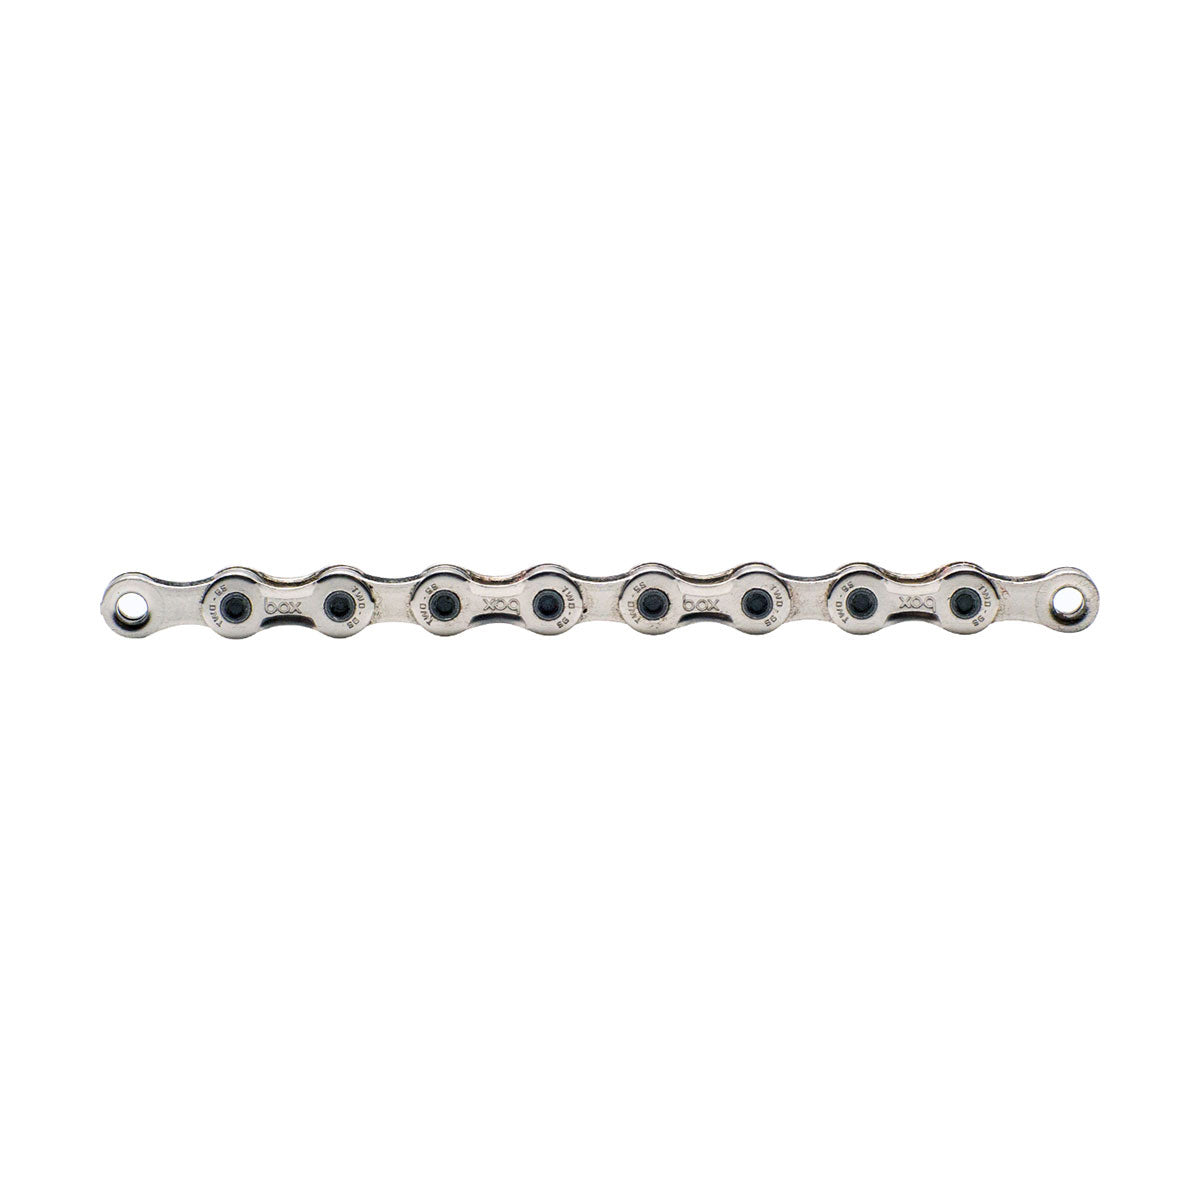 BOX Two Prime 9 Speed Chain - Nickel - 126 Links - 9 Speed